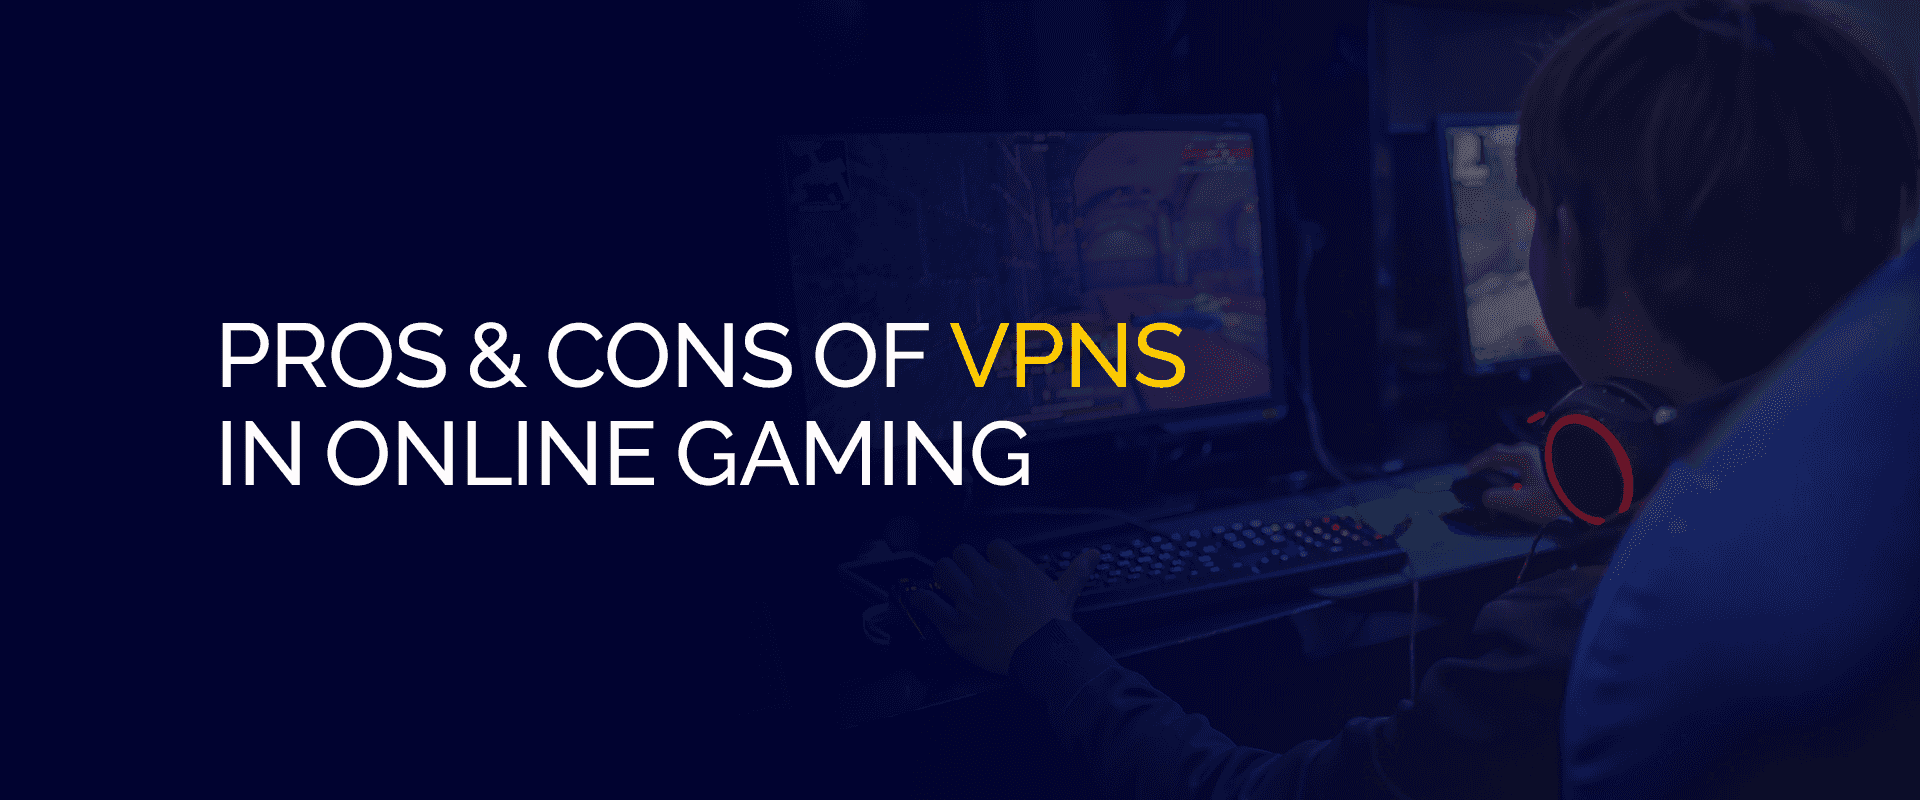 Pros & Cons of VPNs in Online Gaming